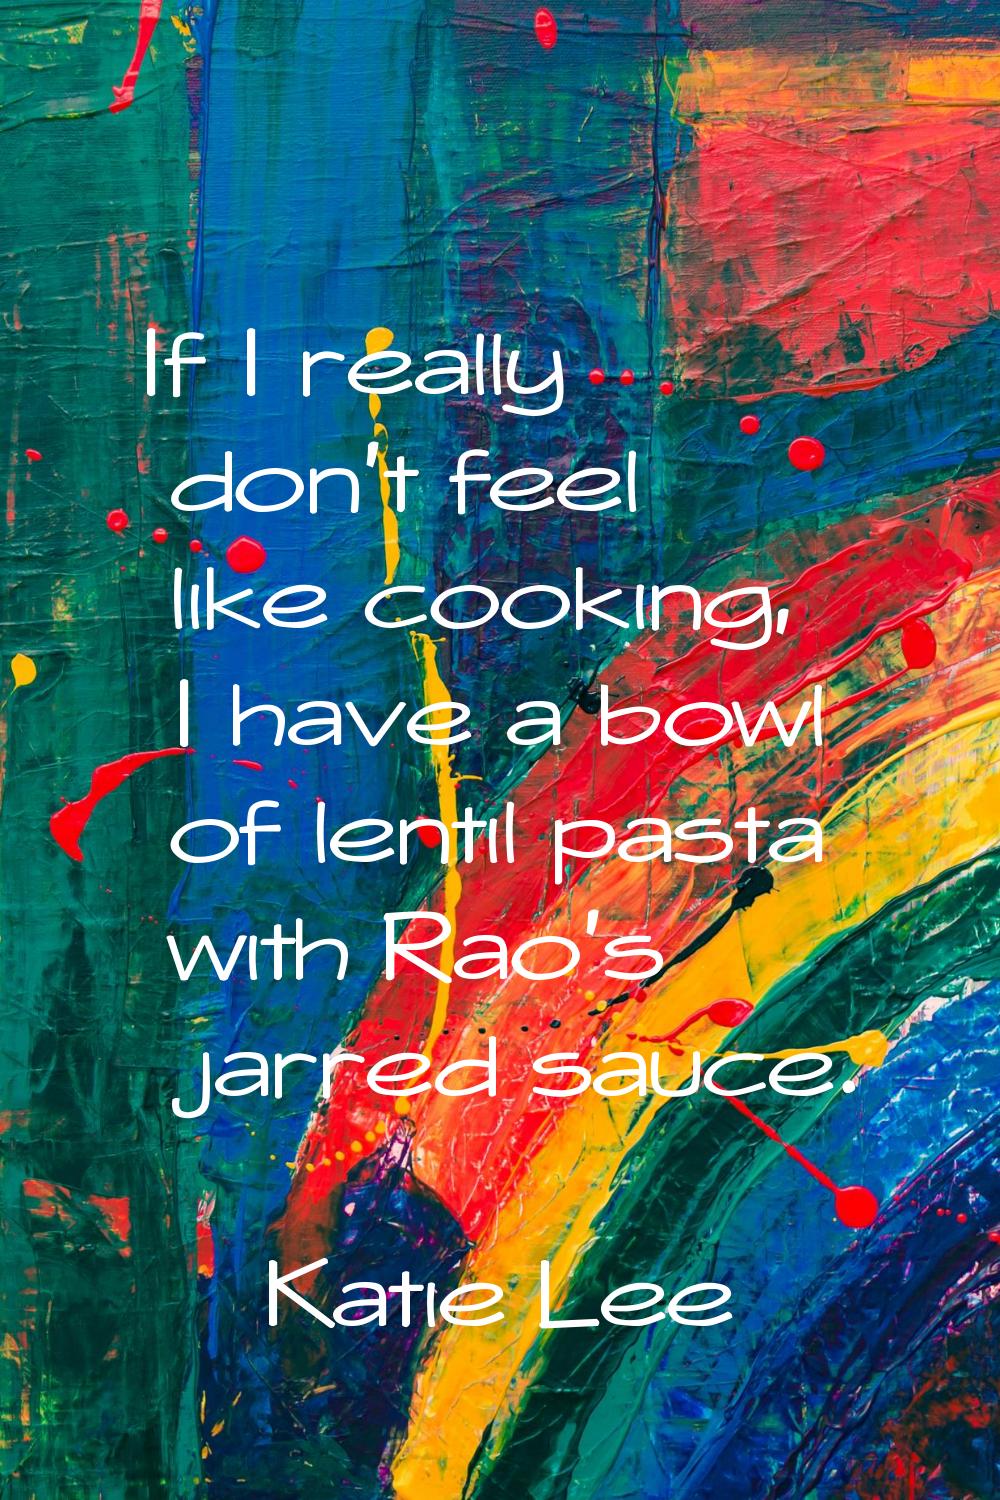 If I really don't feel like cooking, I have a bowl of lentil pasta with Rao's jarred sauce.